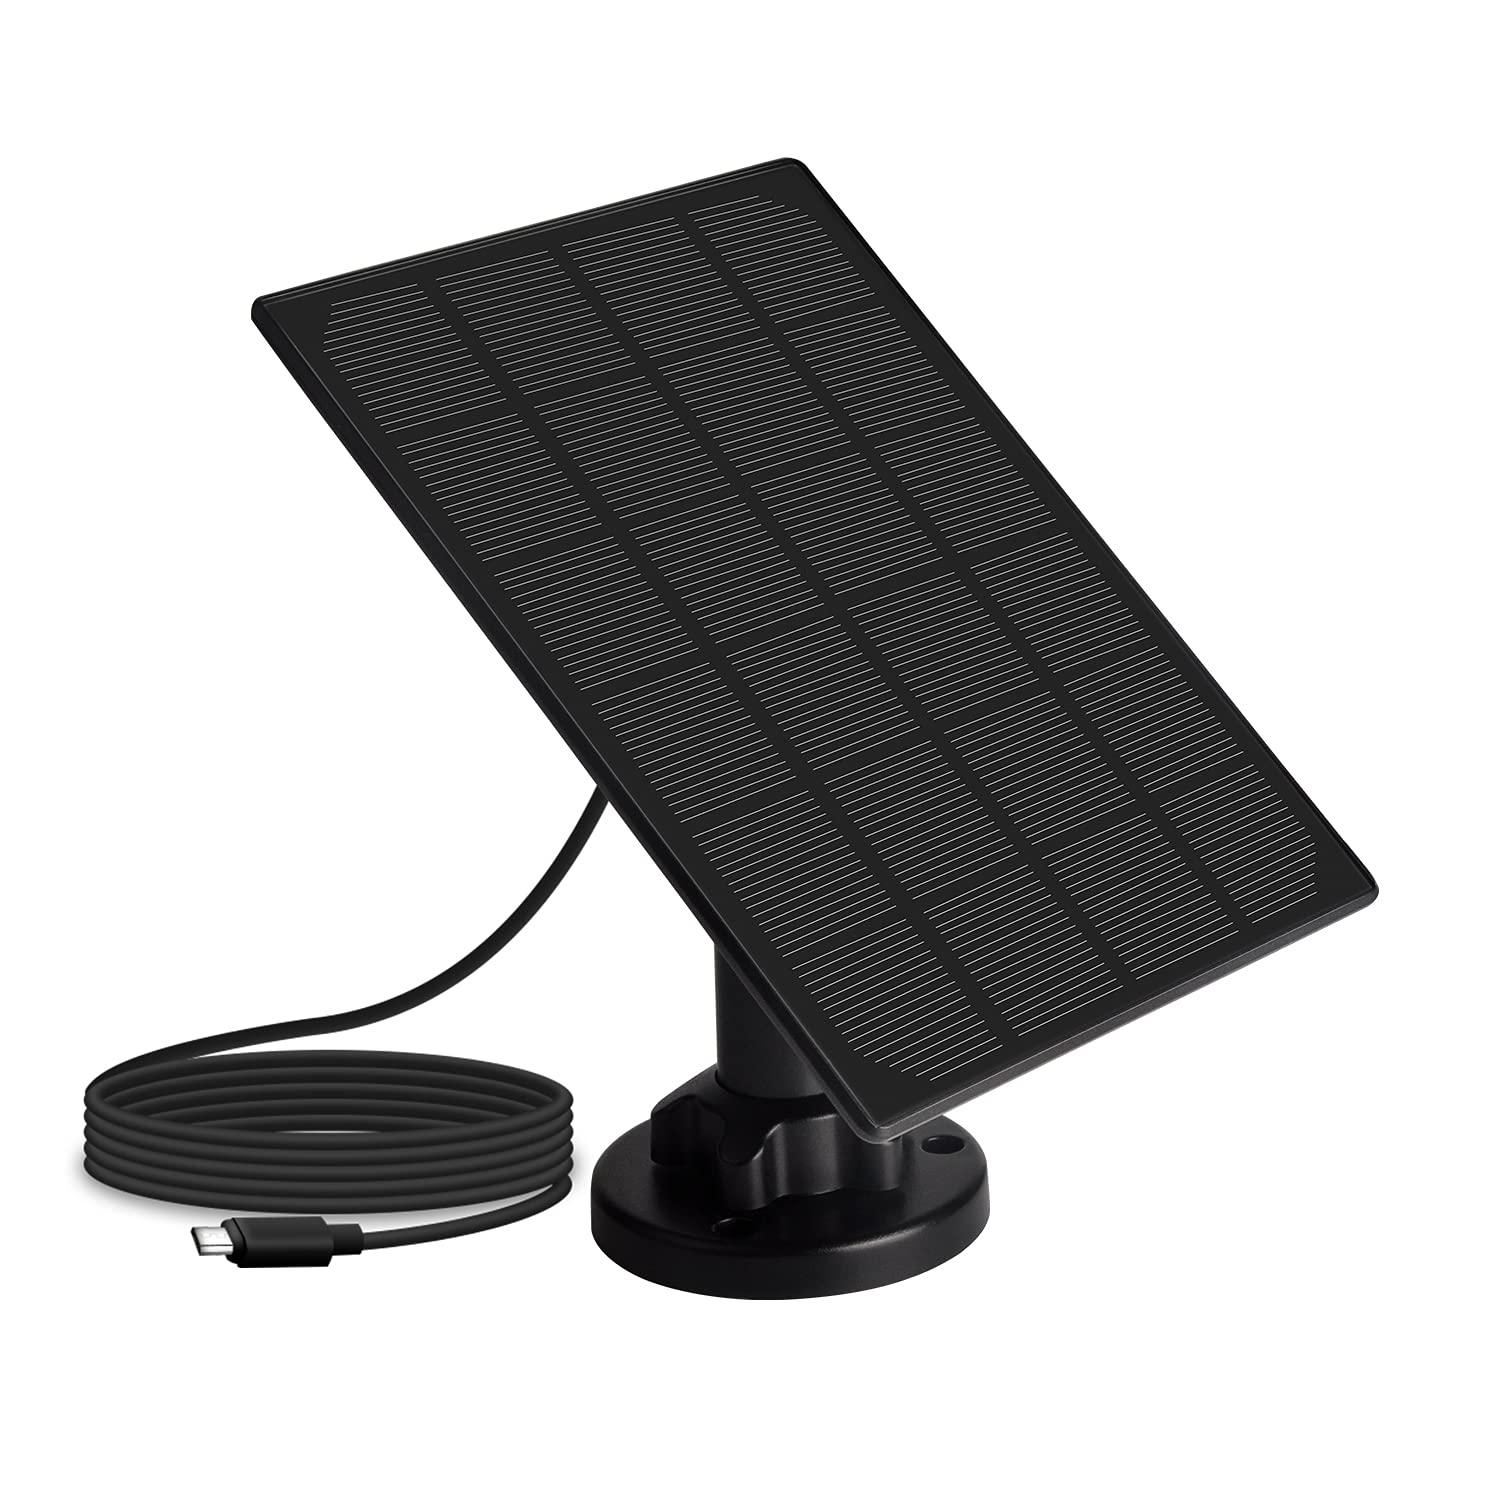 VIEWZONE Solar Panel with Micro USB Cable, Waterproof Solar Panel Power Supply Compatible with Outdoor Rechargeable Battery Security Camera, 5V 3.5W Continuously Charging, Plug and Play